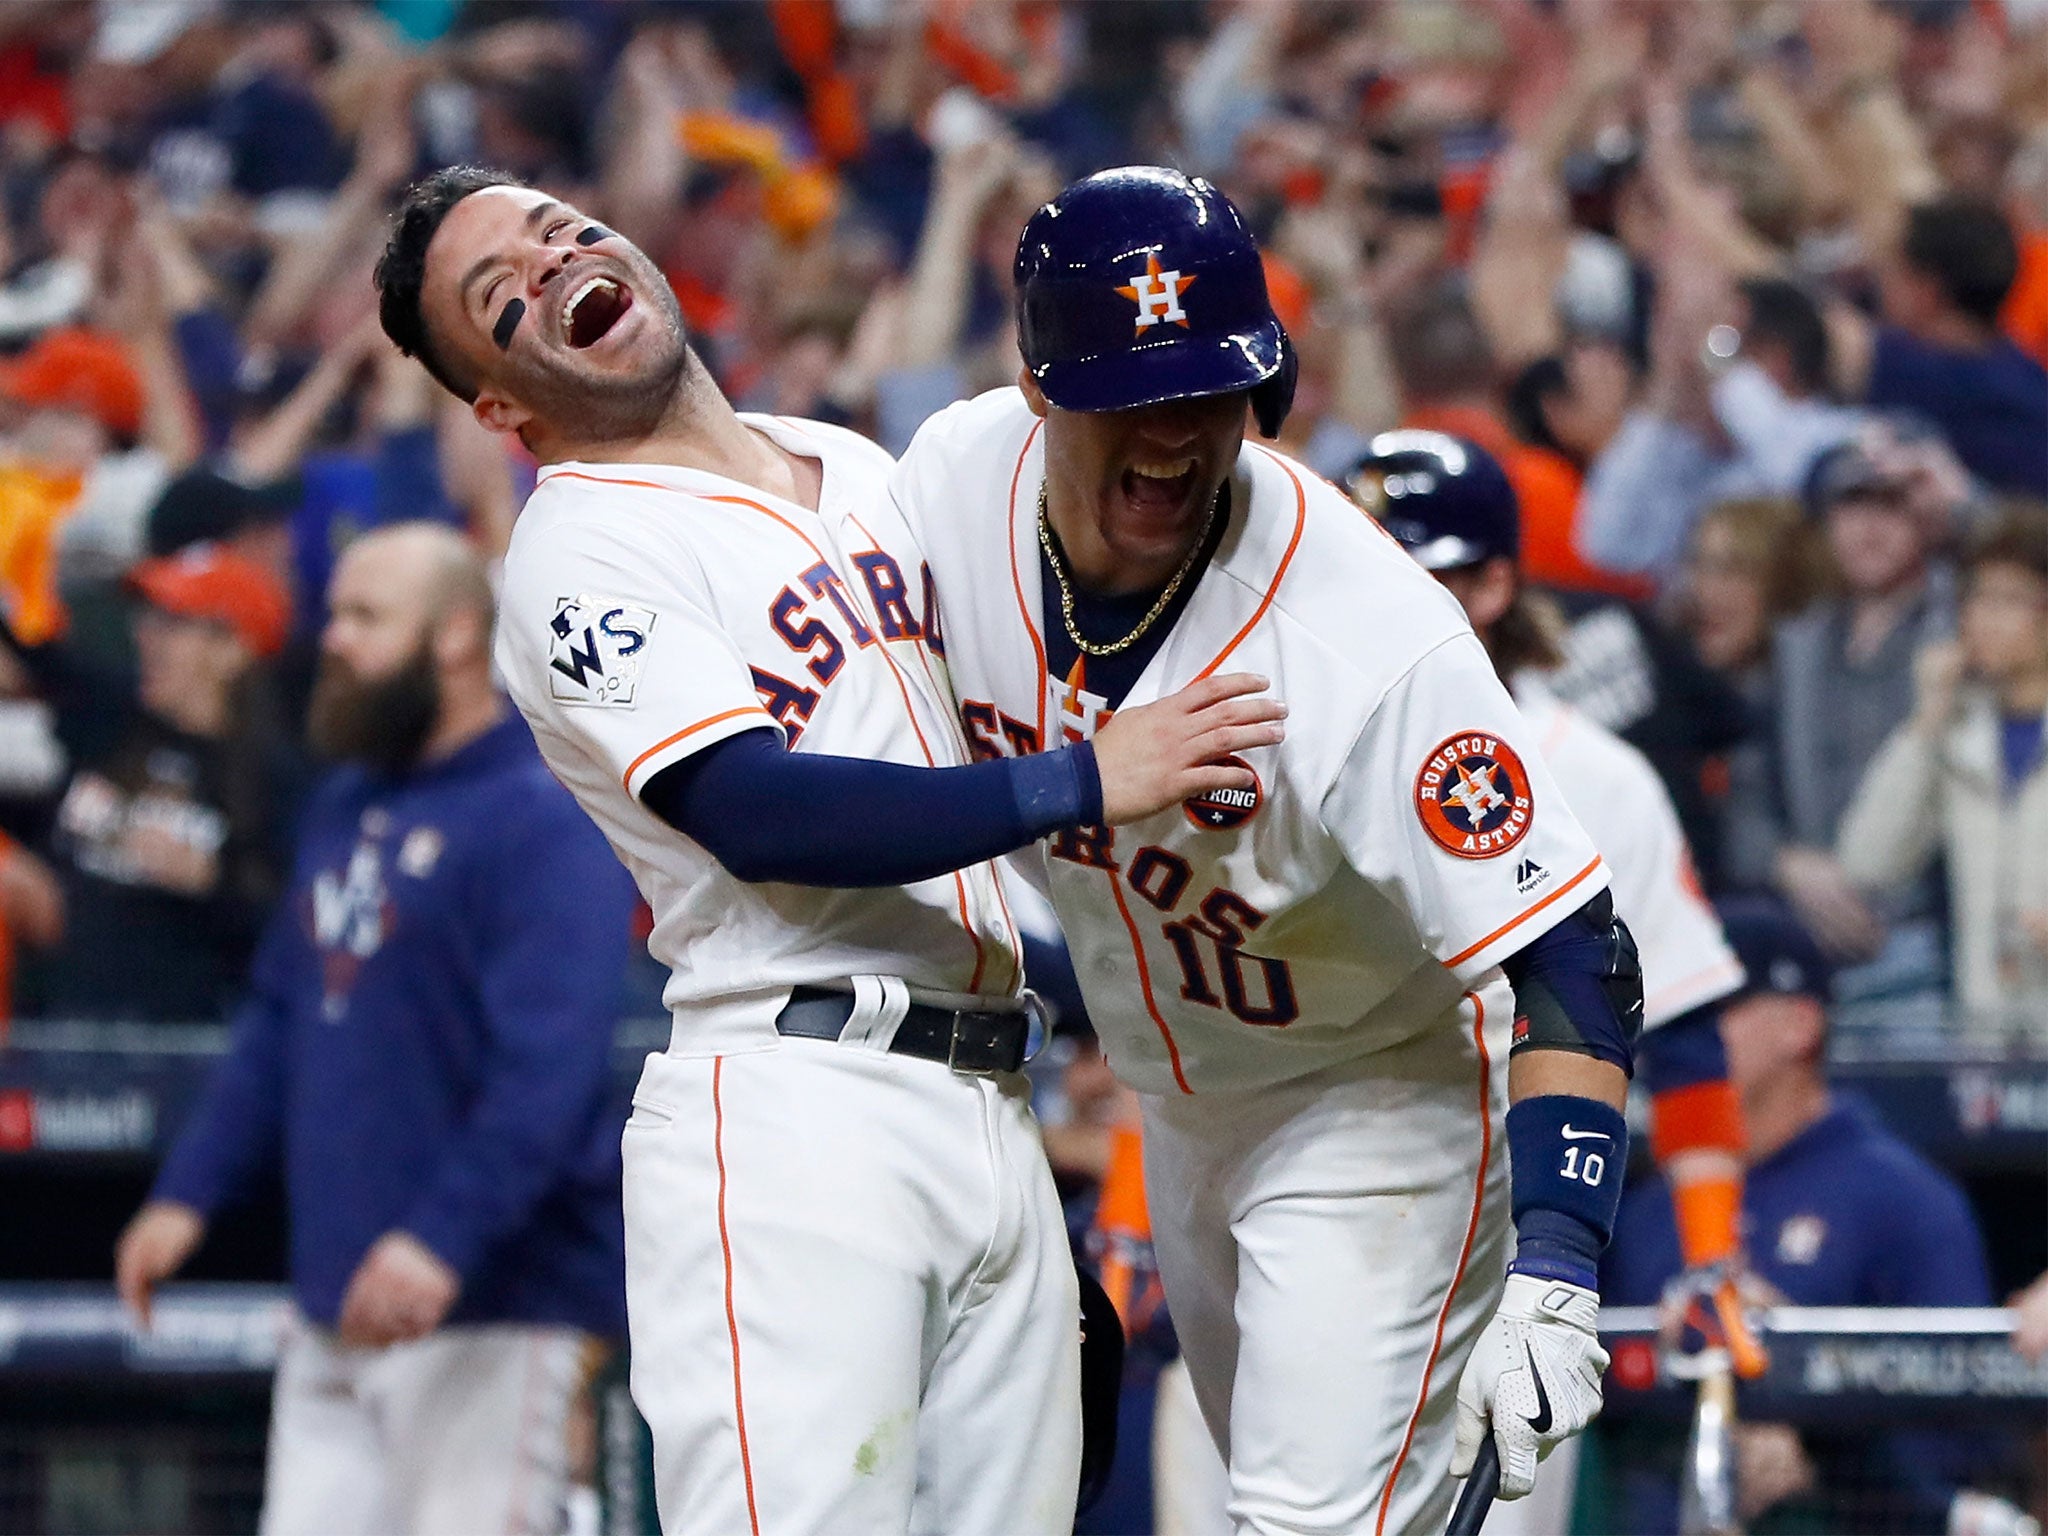 The ball is juiced': Houston Astros within a game of World Series